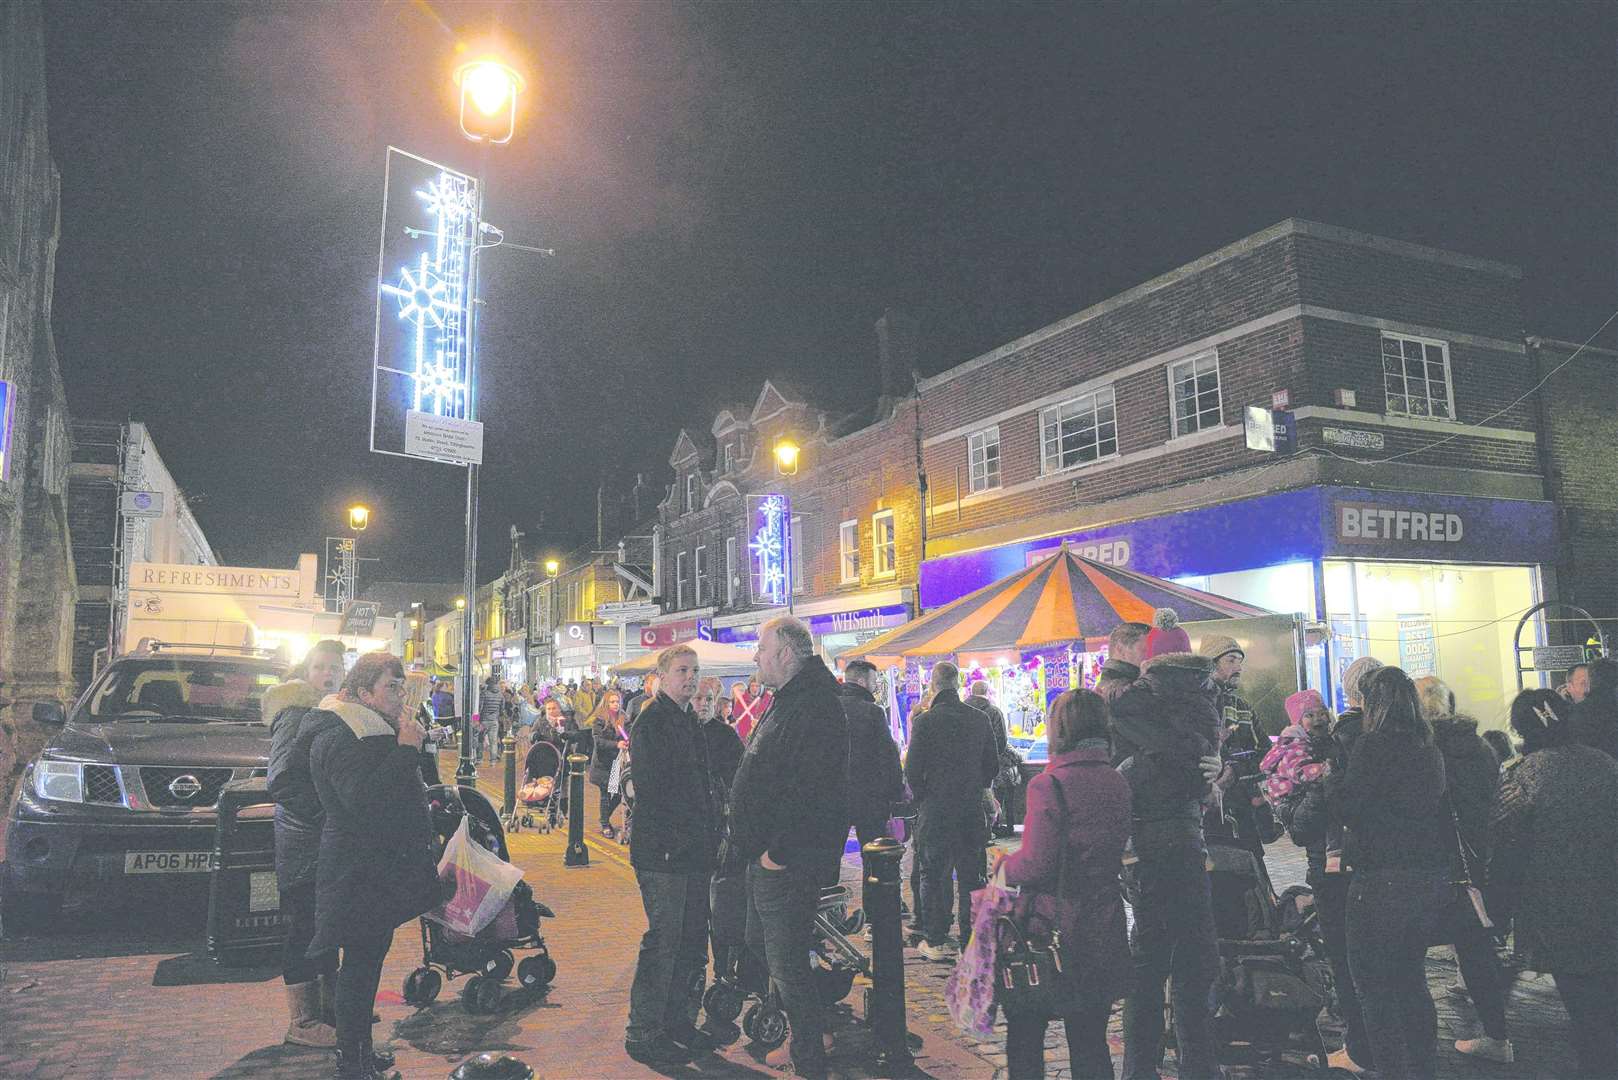 The Christmas Lights in Sittingbourne on Saturday evening. Picture: Chris Davey FM4126565 (4663829)